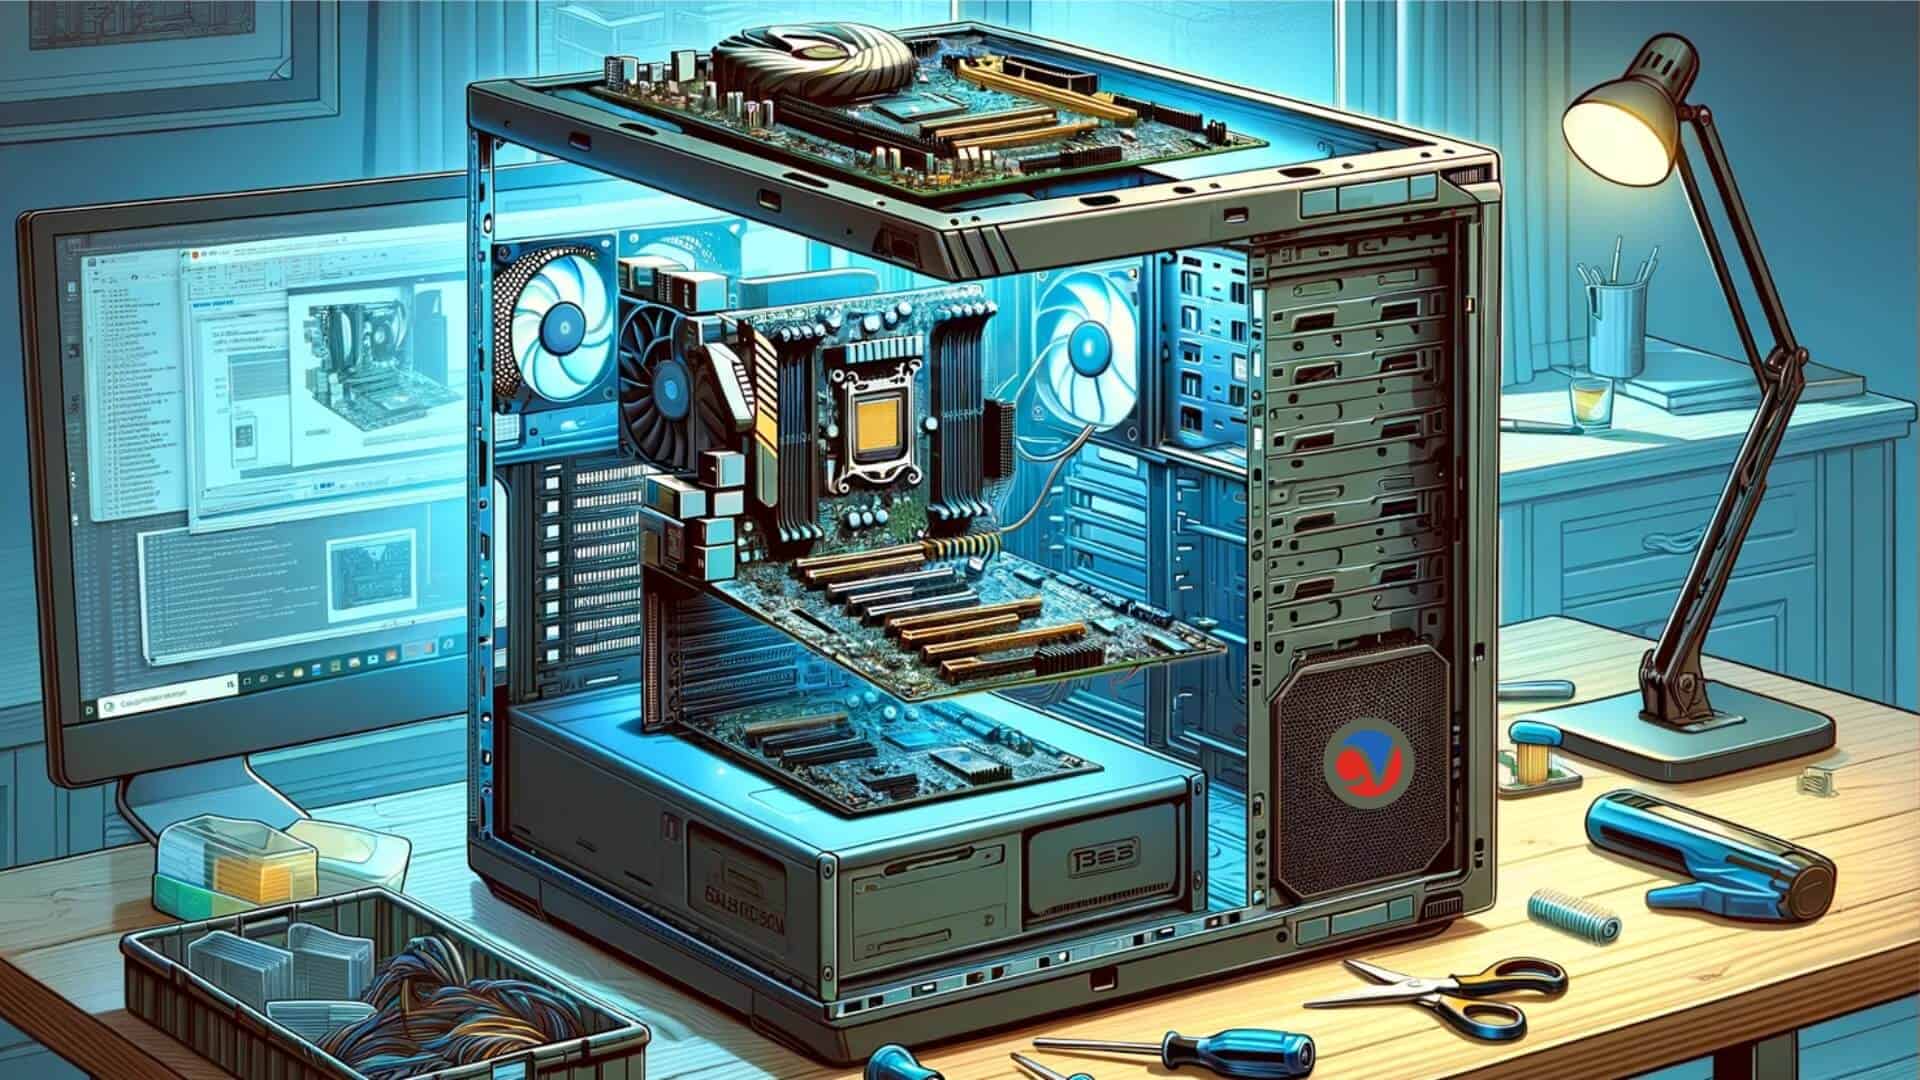 image showing a computer motherboard when upgrading to GIGABYTE X570 AORUS Master motherboard